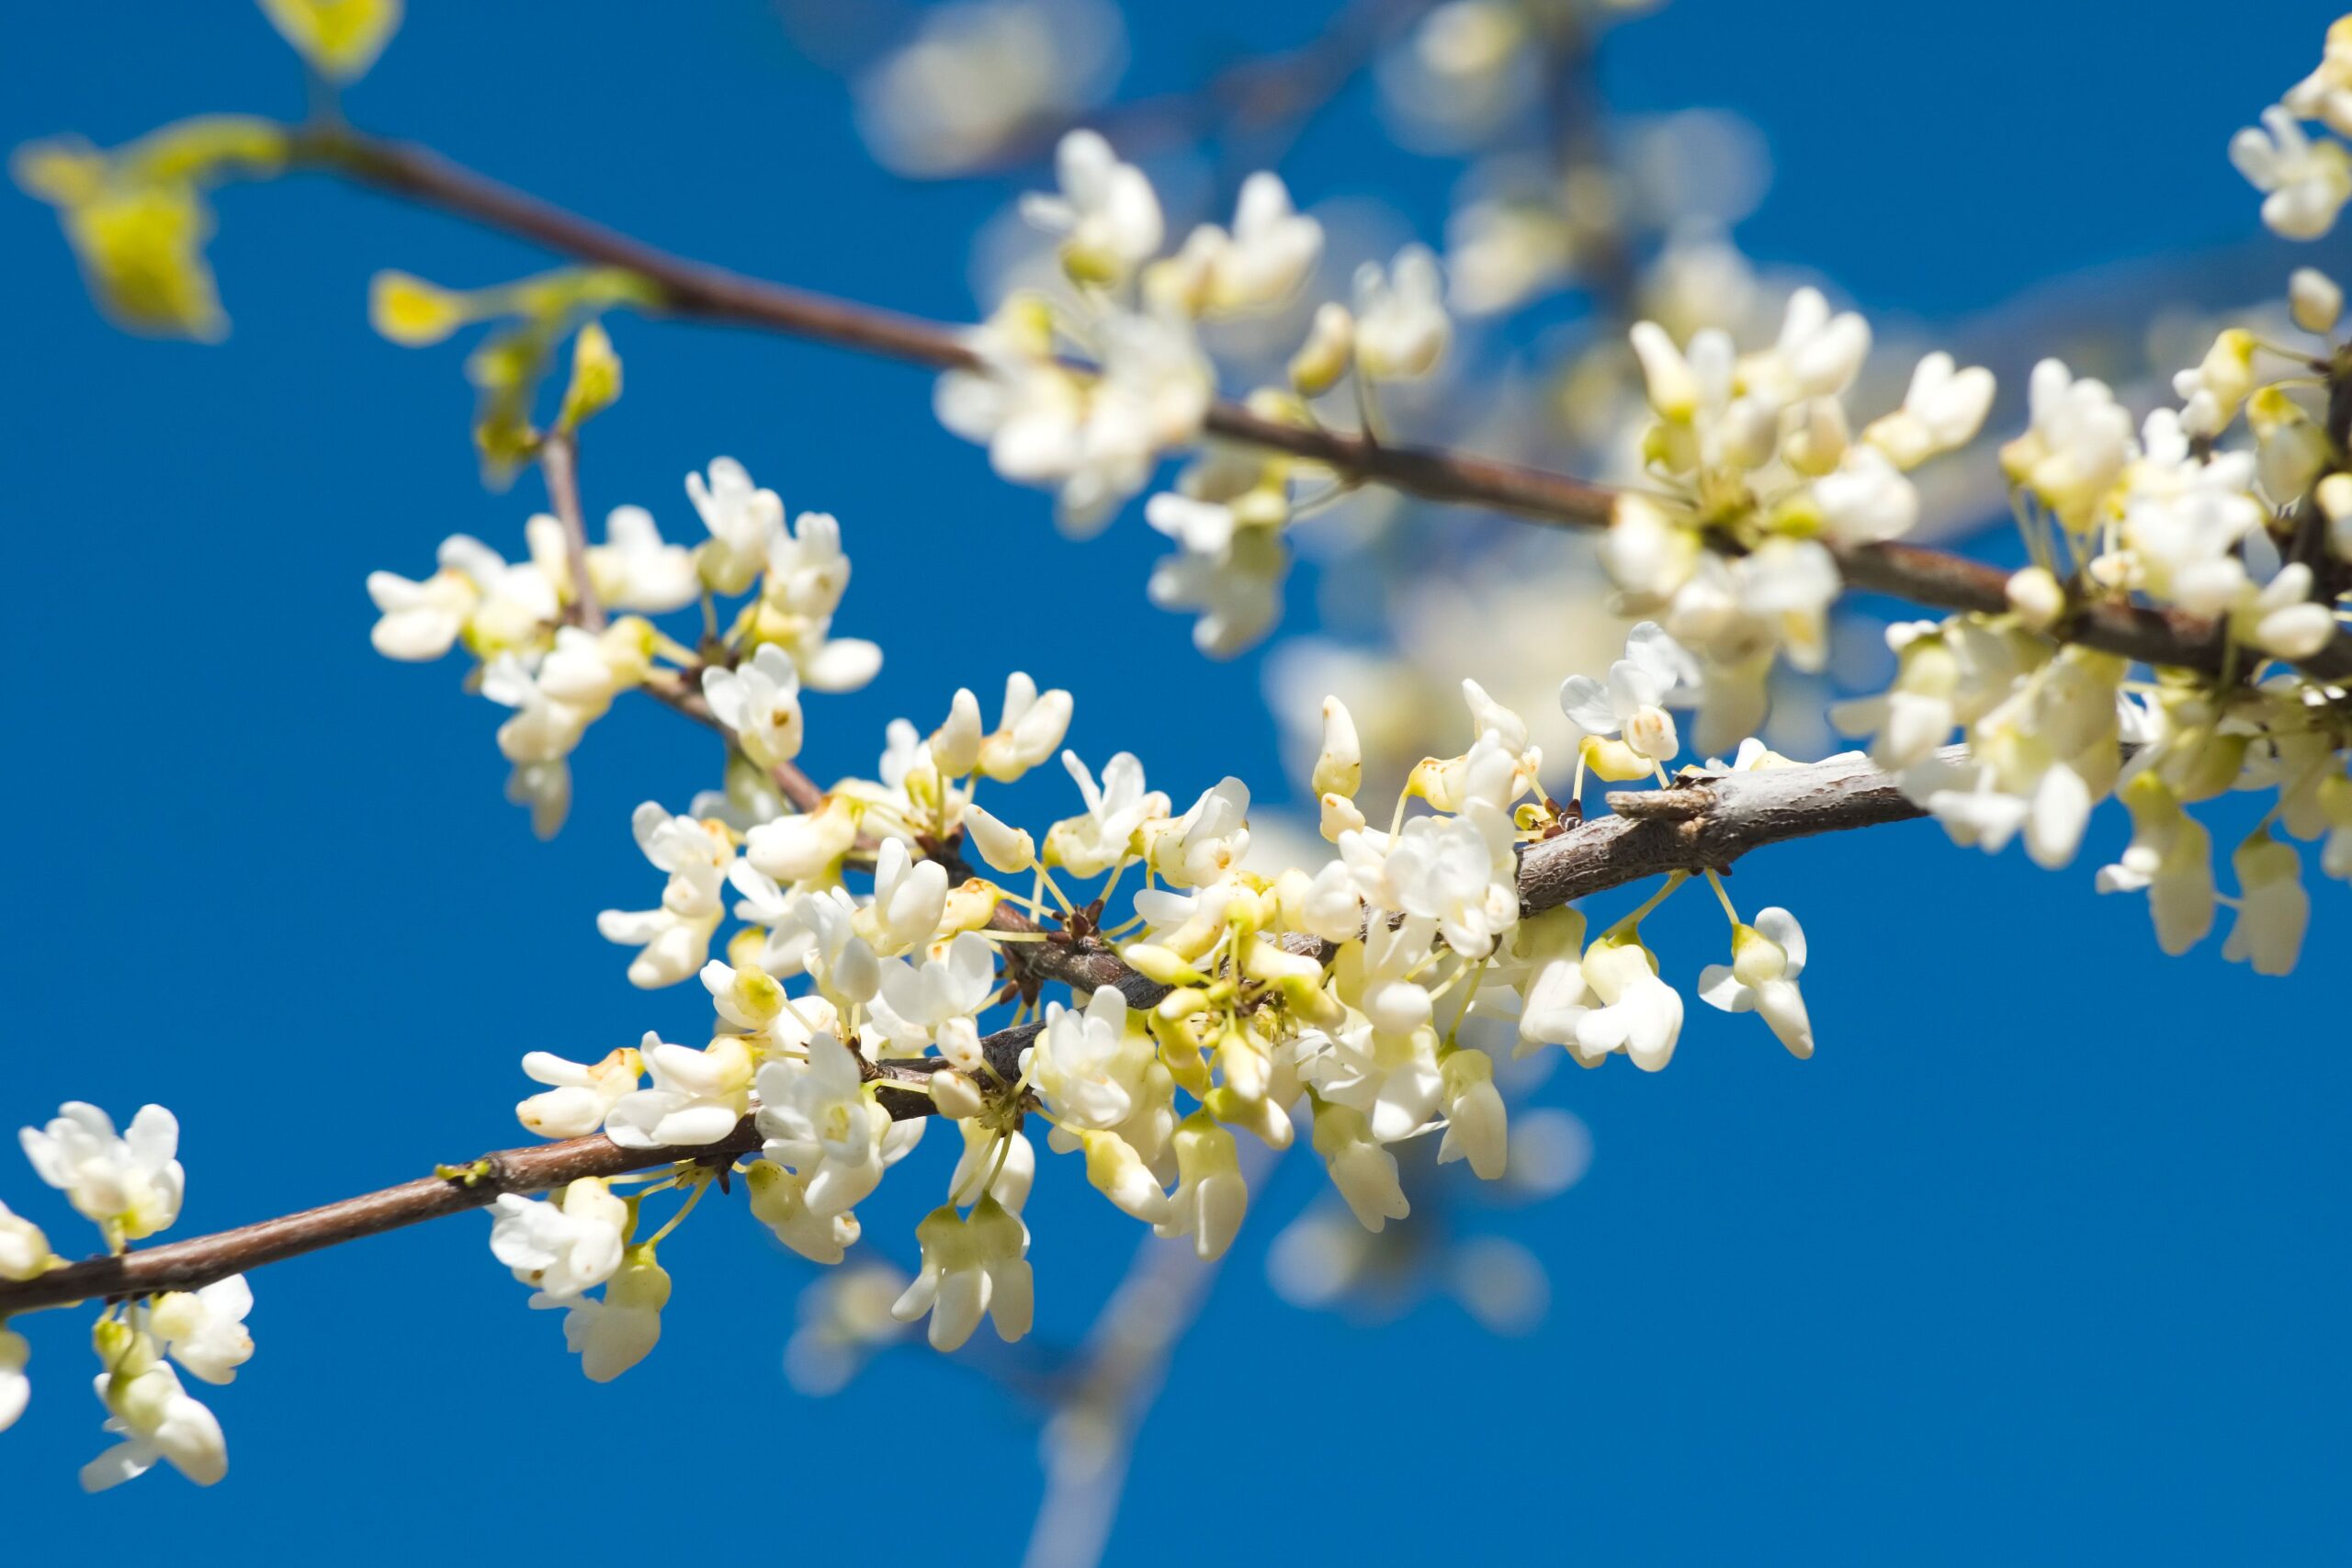 9 Best White Flowering Trees to Brighten Up Your Landscape